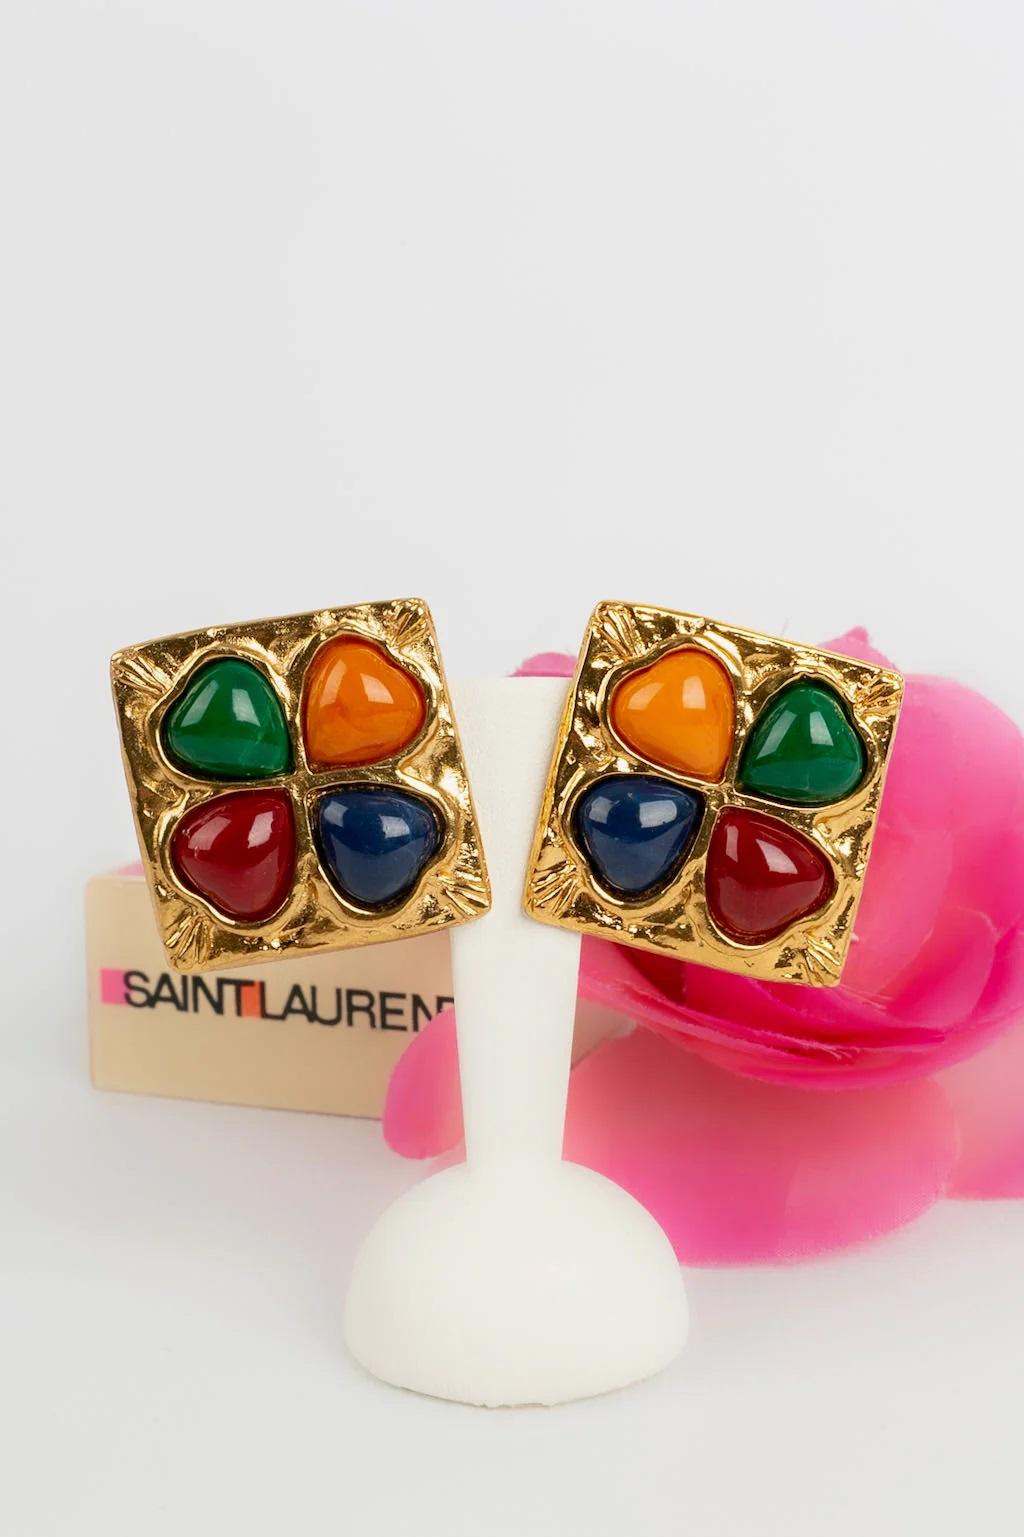 Yves Saint Laurent Hammered Metal Clip Earrings & Multicolored Resin Cabochons For Sale 1